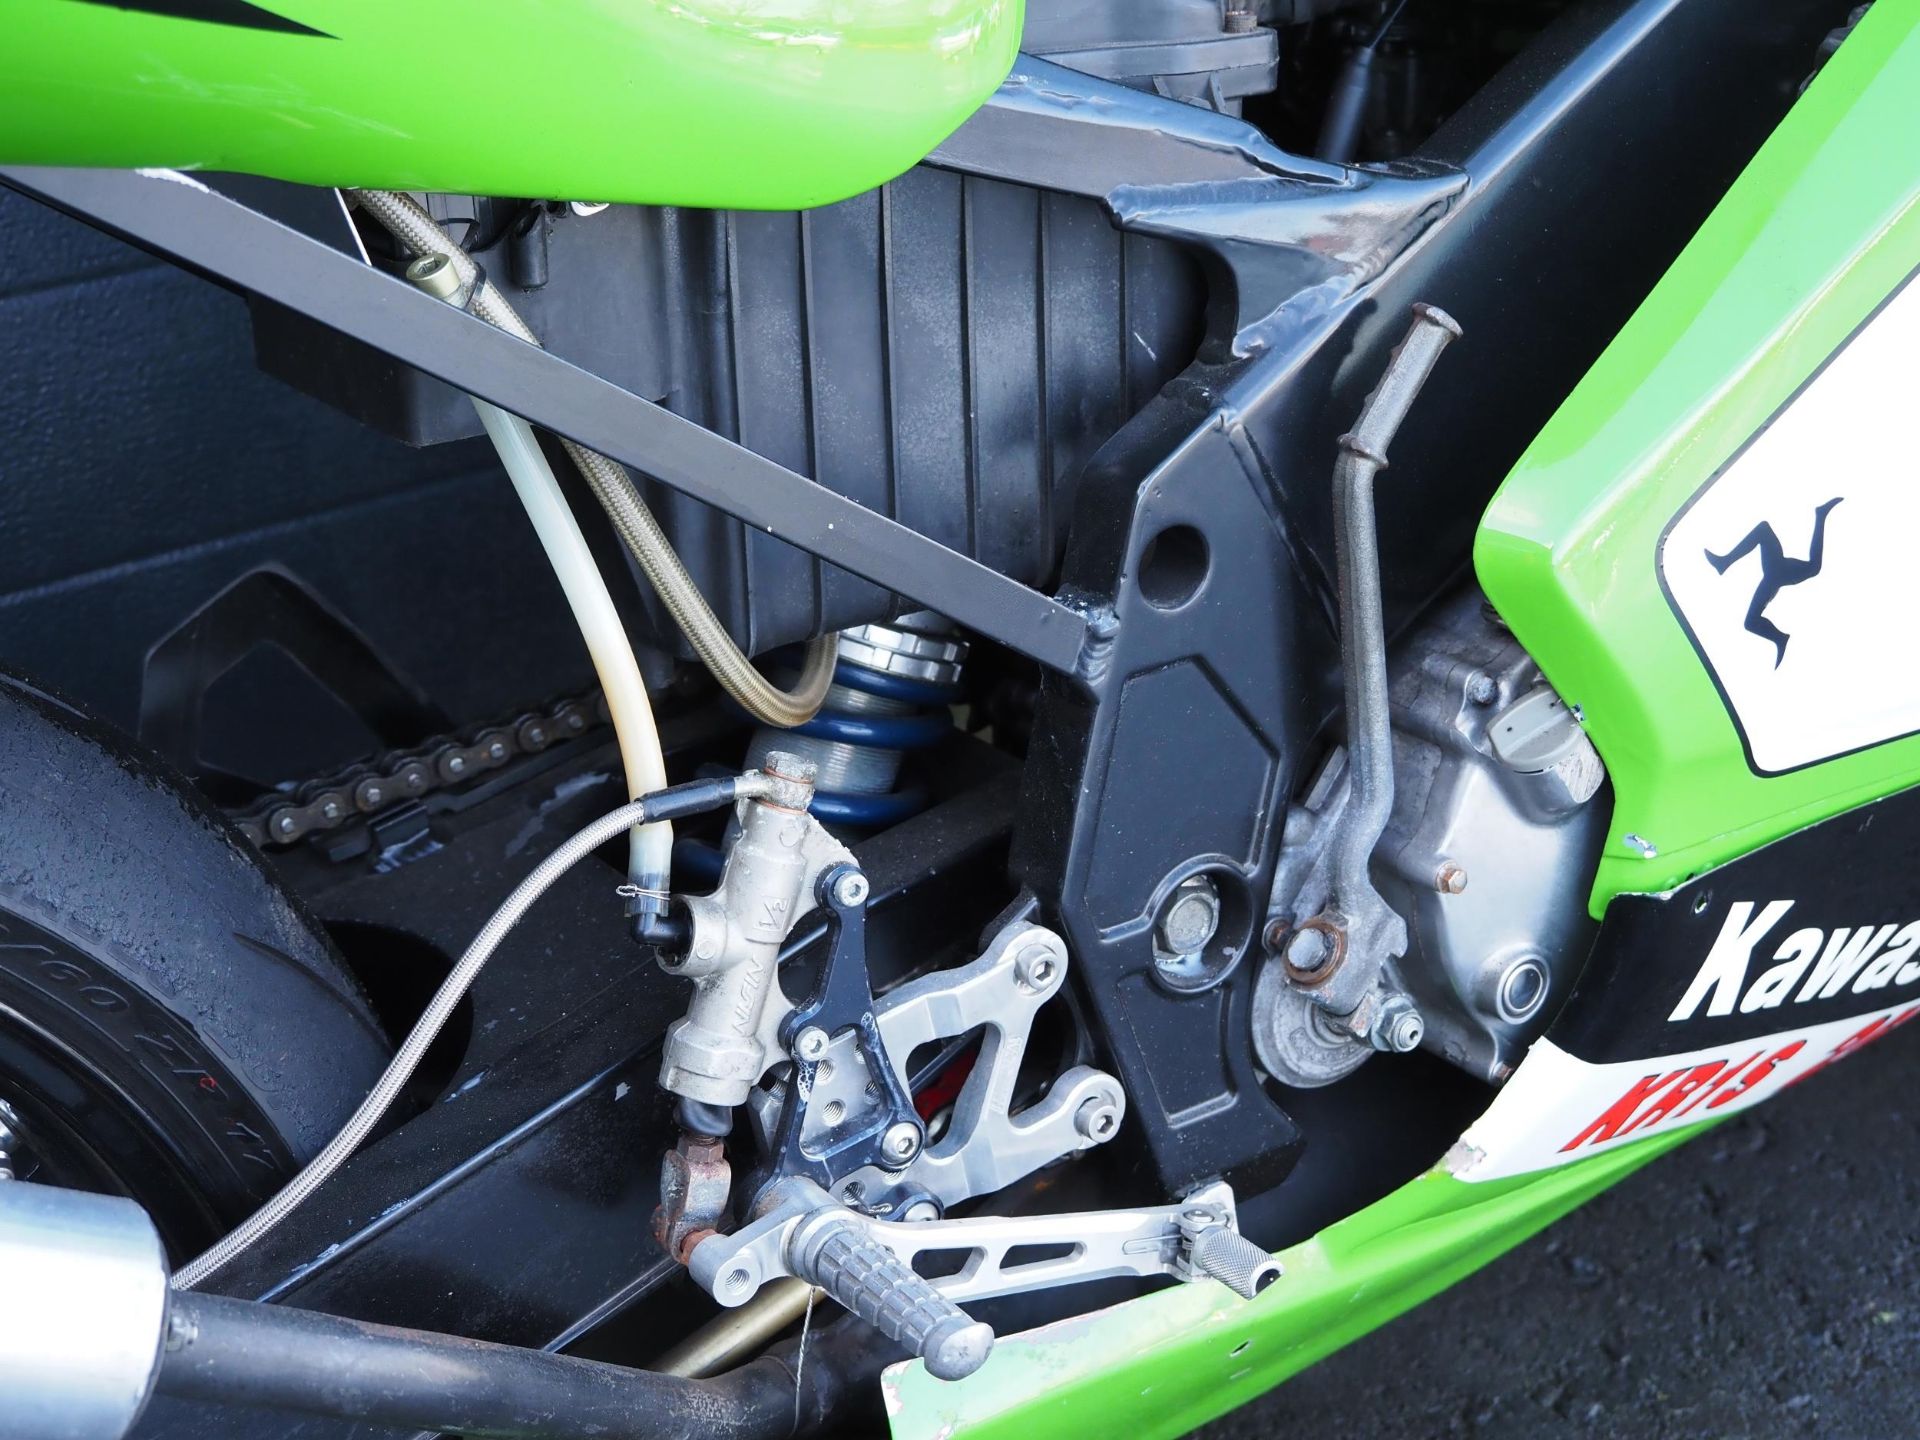 Kawasaki KR1-S 250 F2 motorcycle. 1992 This bike was ridden by Billy Redmayne at the 2015 Classic F2 - Image 6 of 8